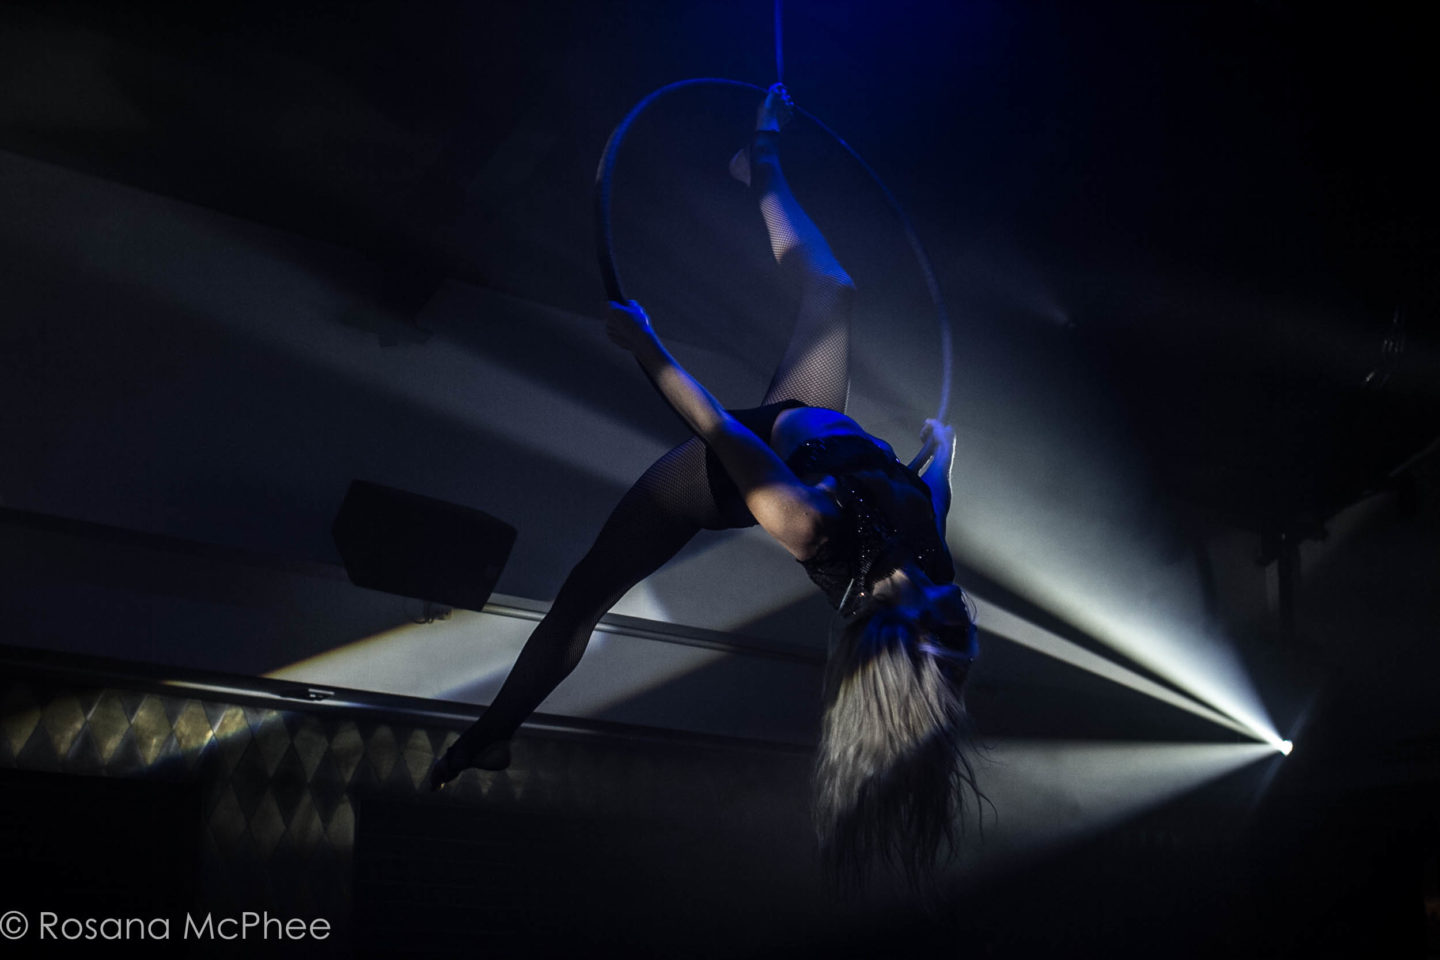 The entertainment at Circus - aerialists to fire-eaters, dancers to drag and more...